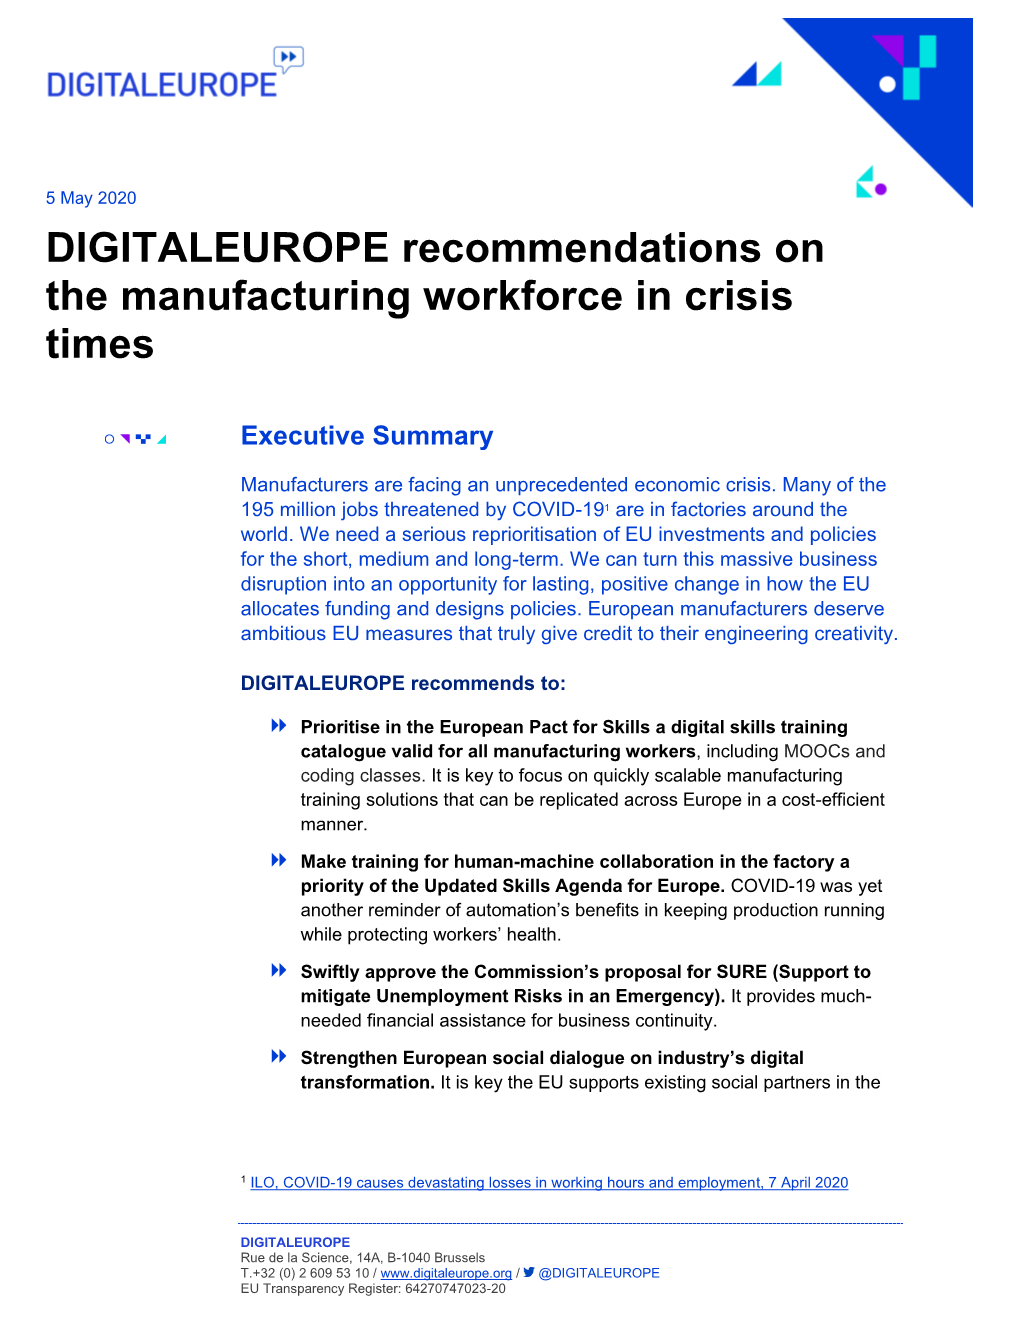 DIGITALEUROPE Recommendations on the Manufacturing Workforce in Crisis Times